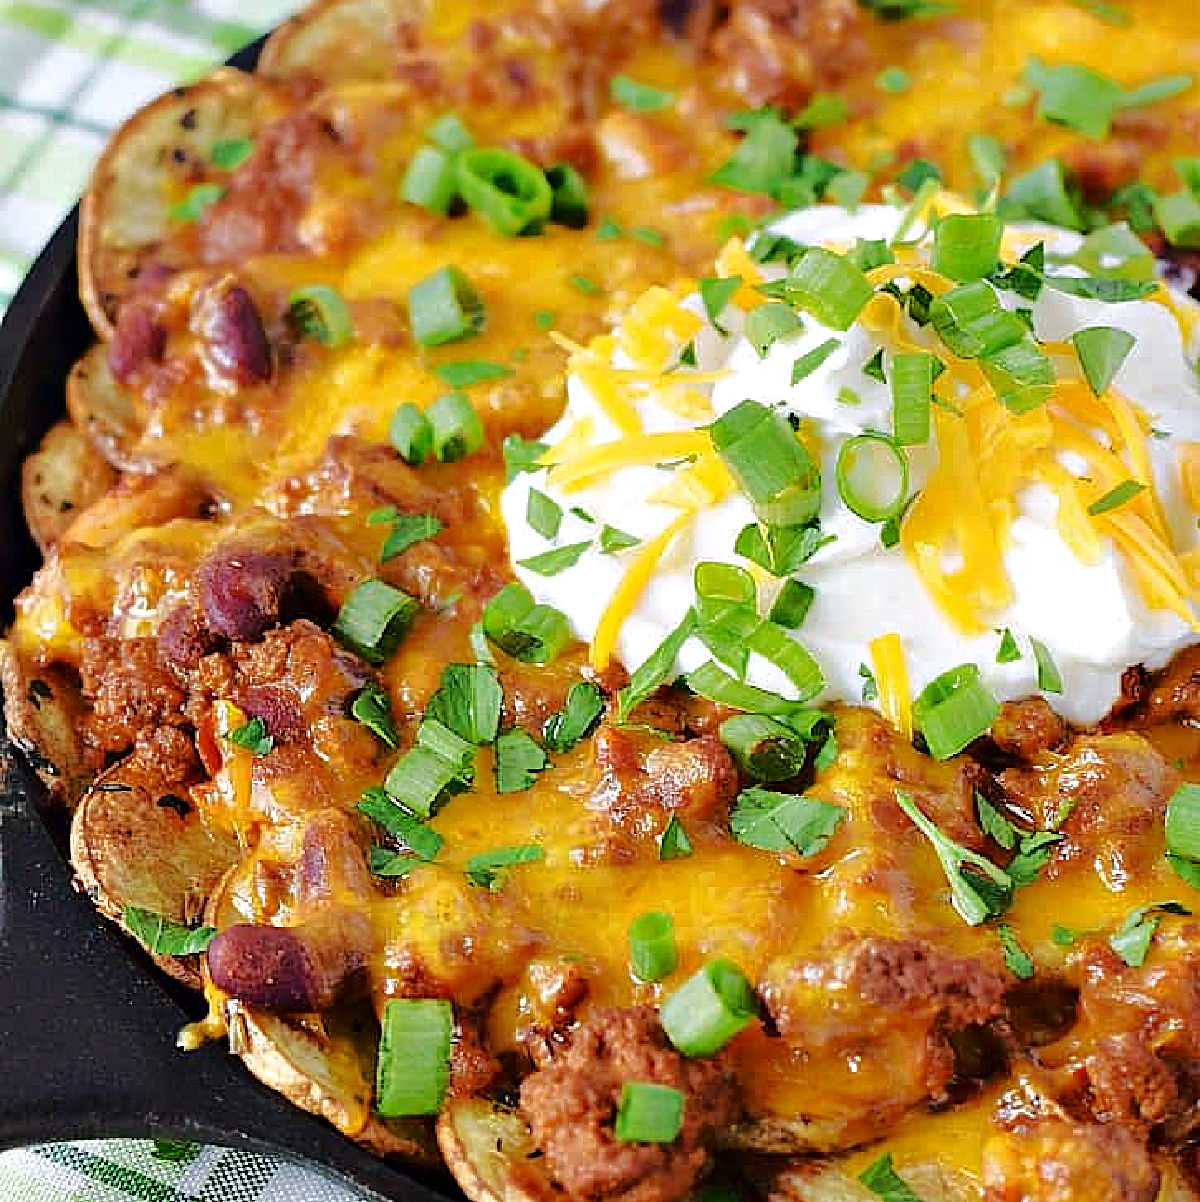 Thin sliced potato slices topped with chili, melted cheese, sour cream and green onions.